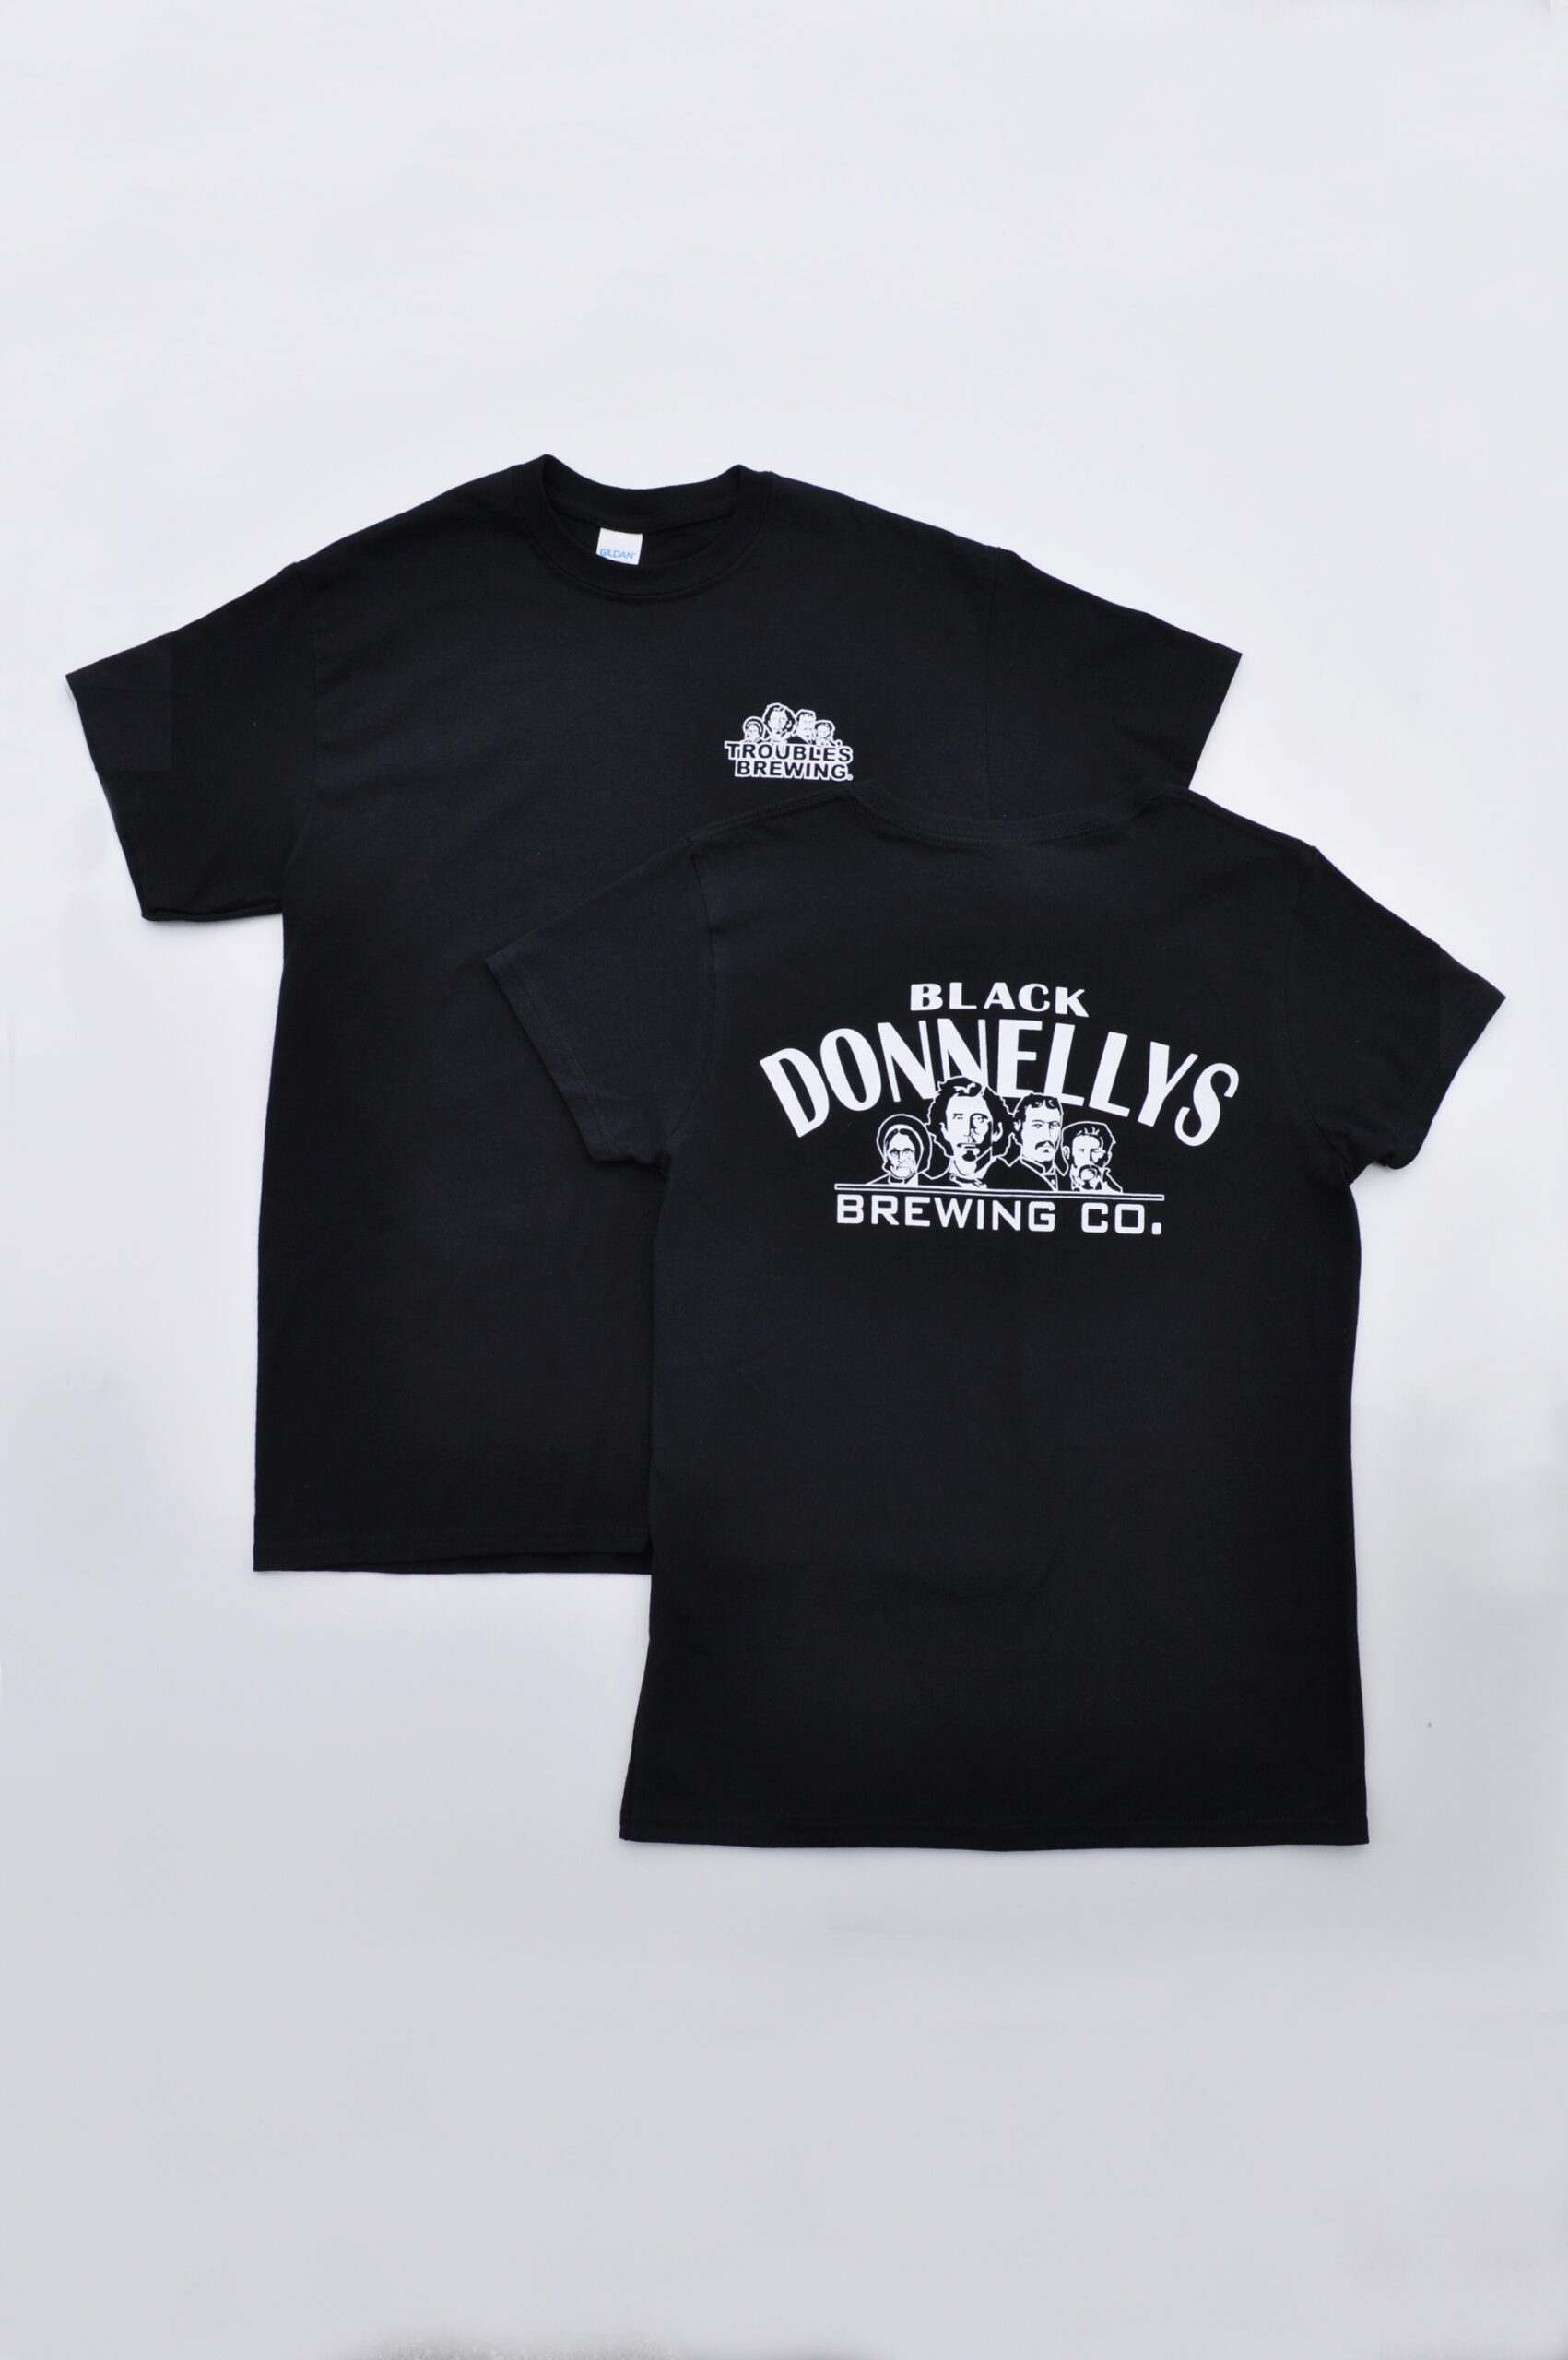 The Front And Back Of A Black Donnellys Brewing Company T-shirt In Black With A White And Black Logo Both On The Front And Back.